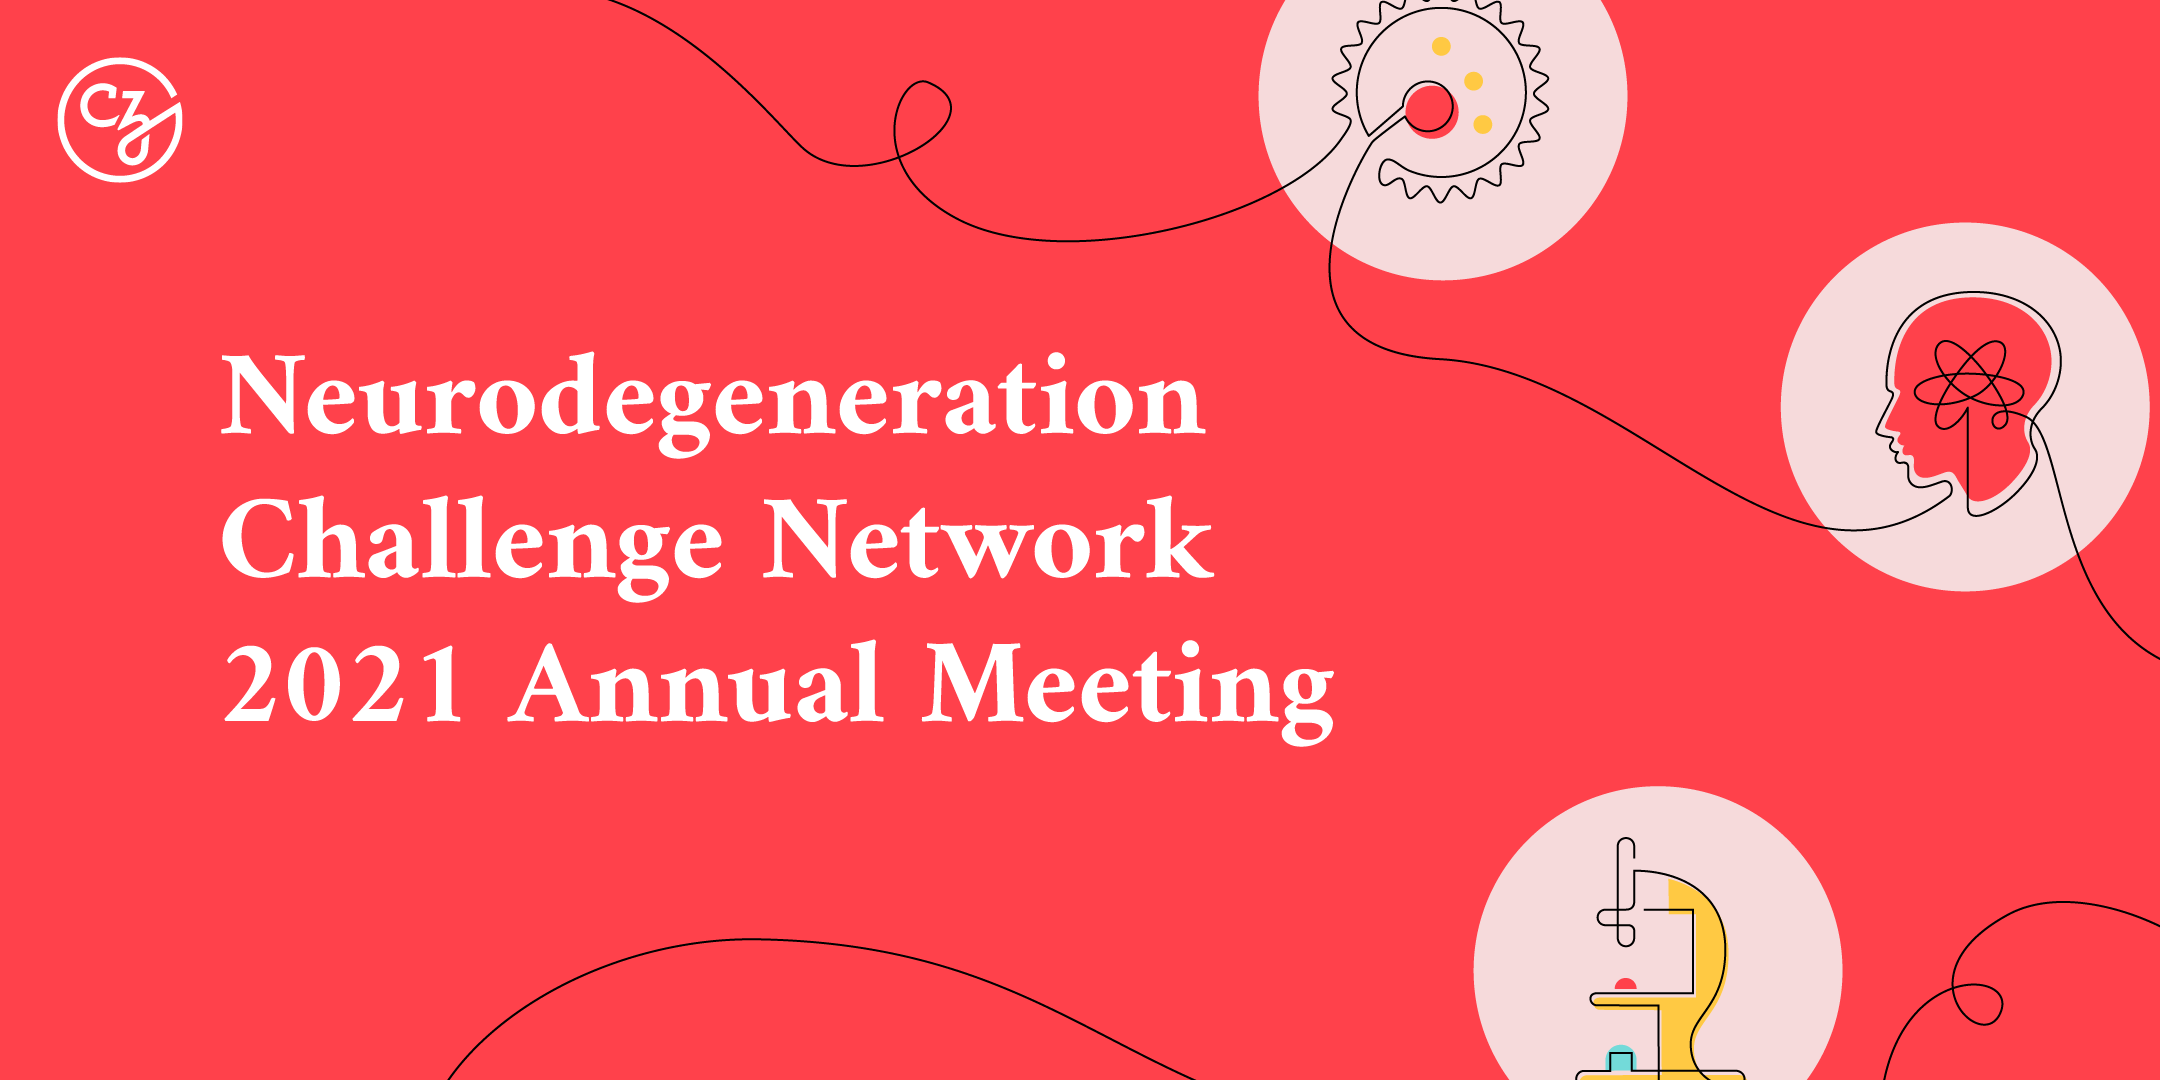 Text overlays a bright red background with graphical scientific elements and reads, “Neurodegeneration Challenge Network 2021 Annual Meeting.”